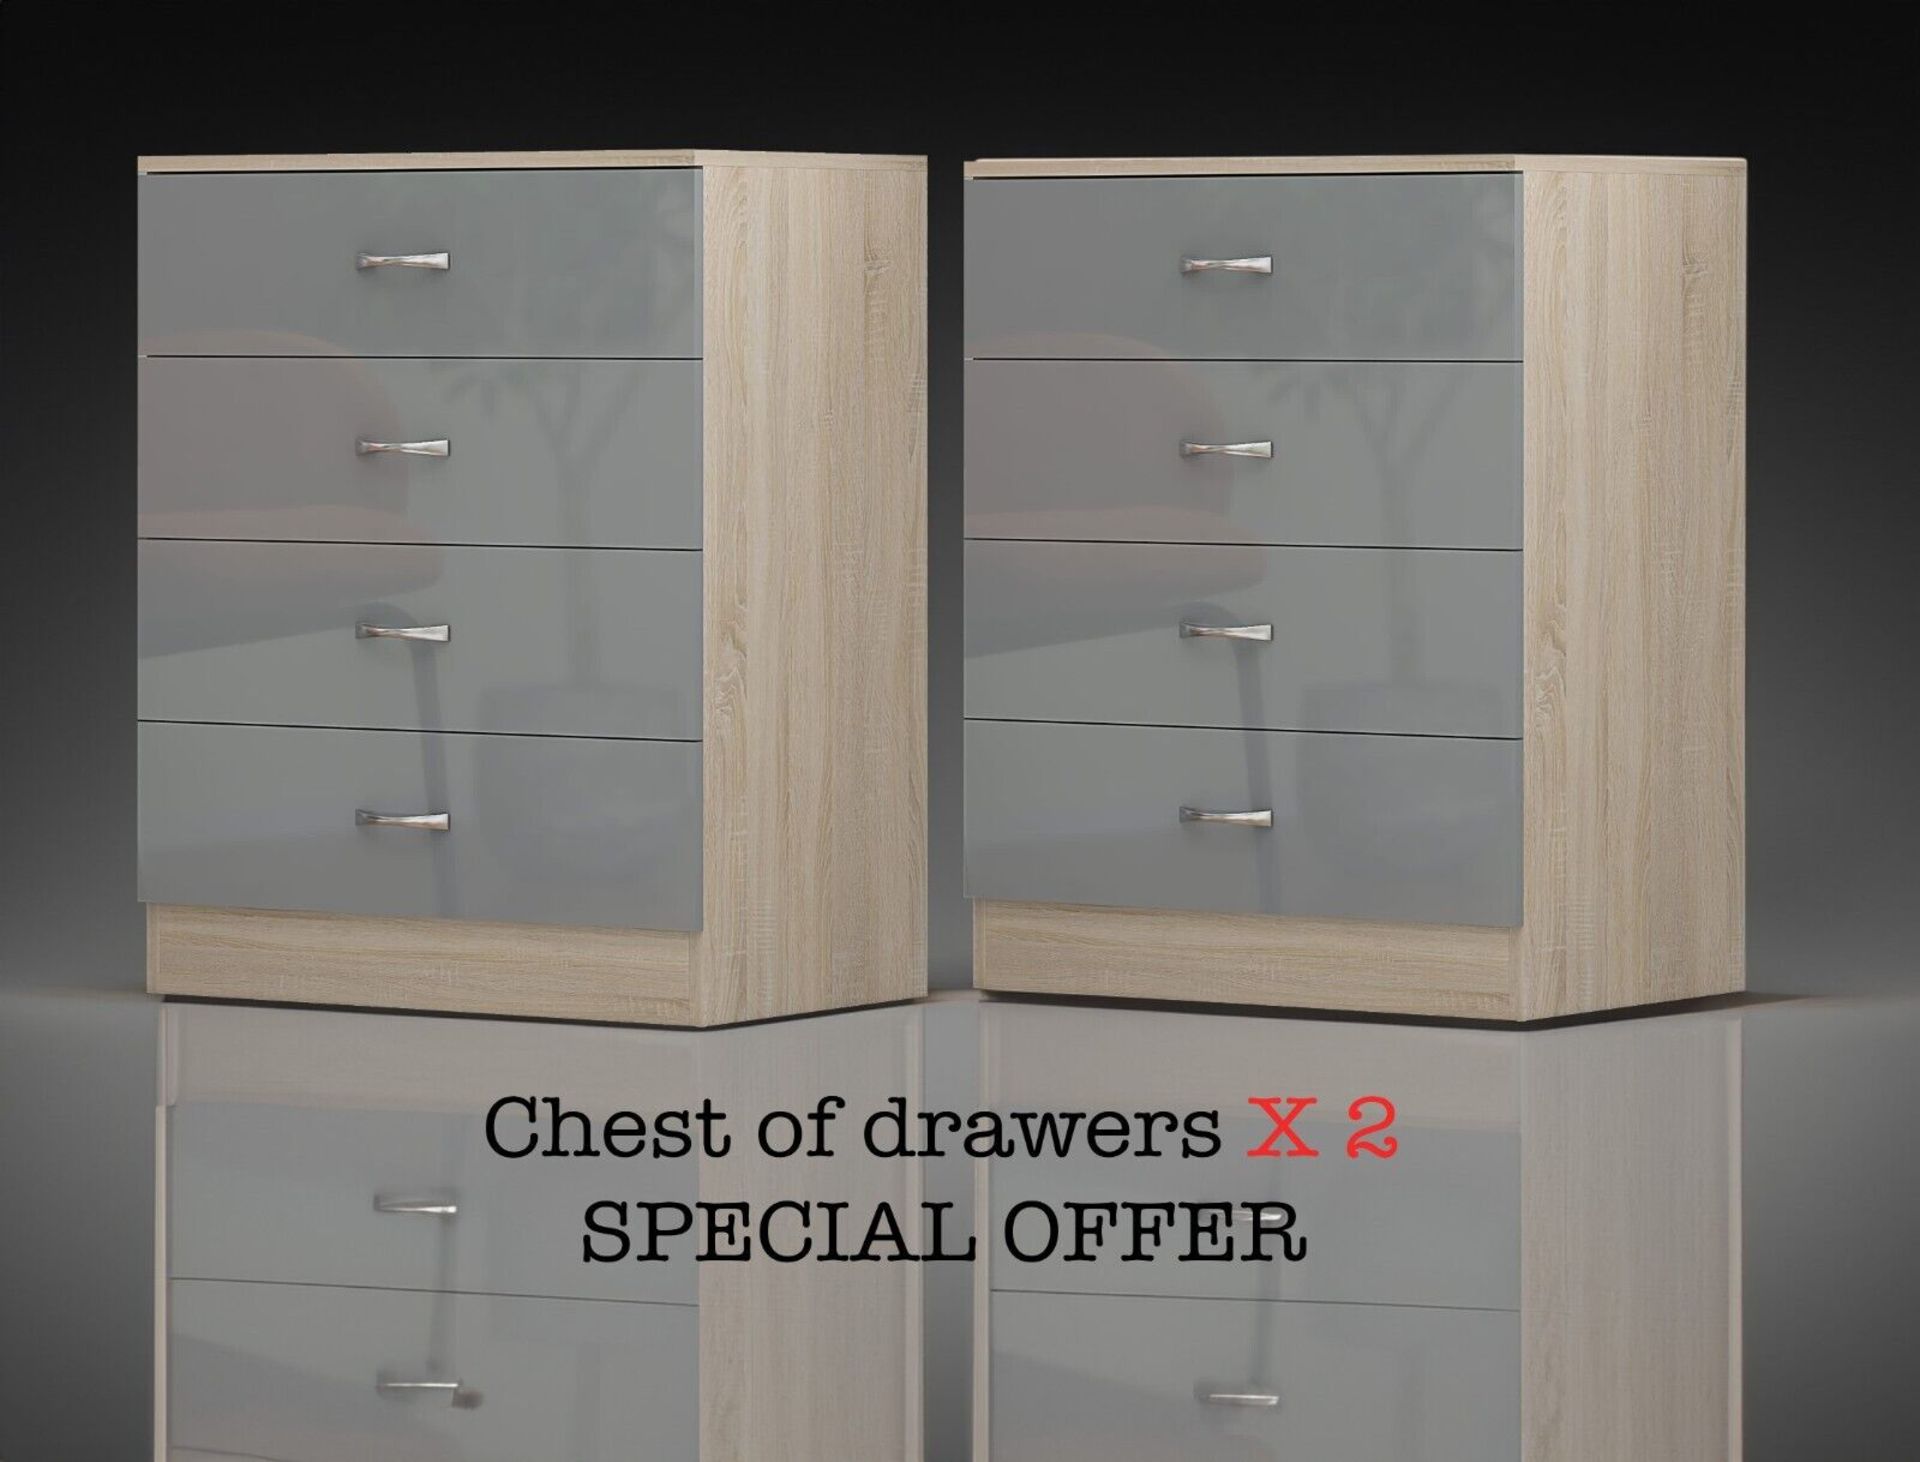 STUNNING CHEST OF DRAWERS X 2 - HIGH GLOSS GREY ON SONOMA OAK FRAME